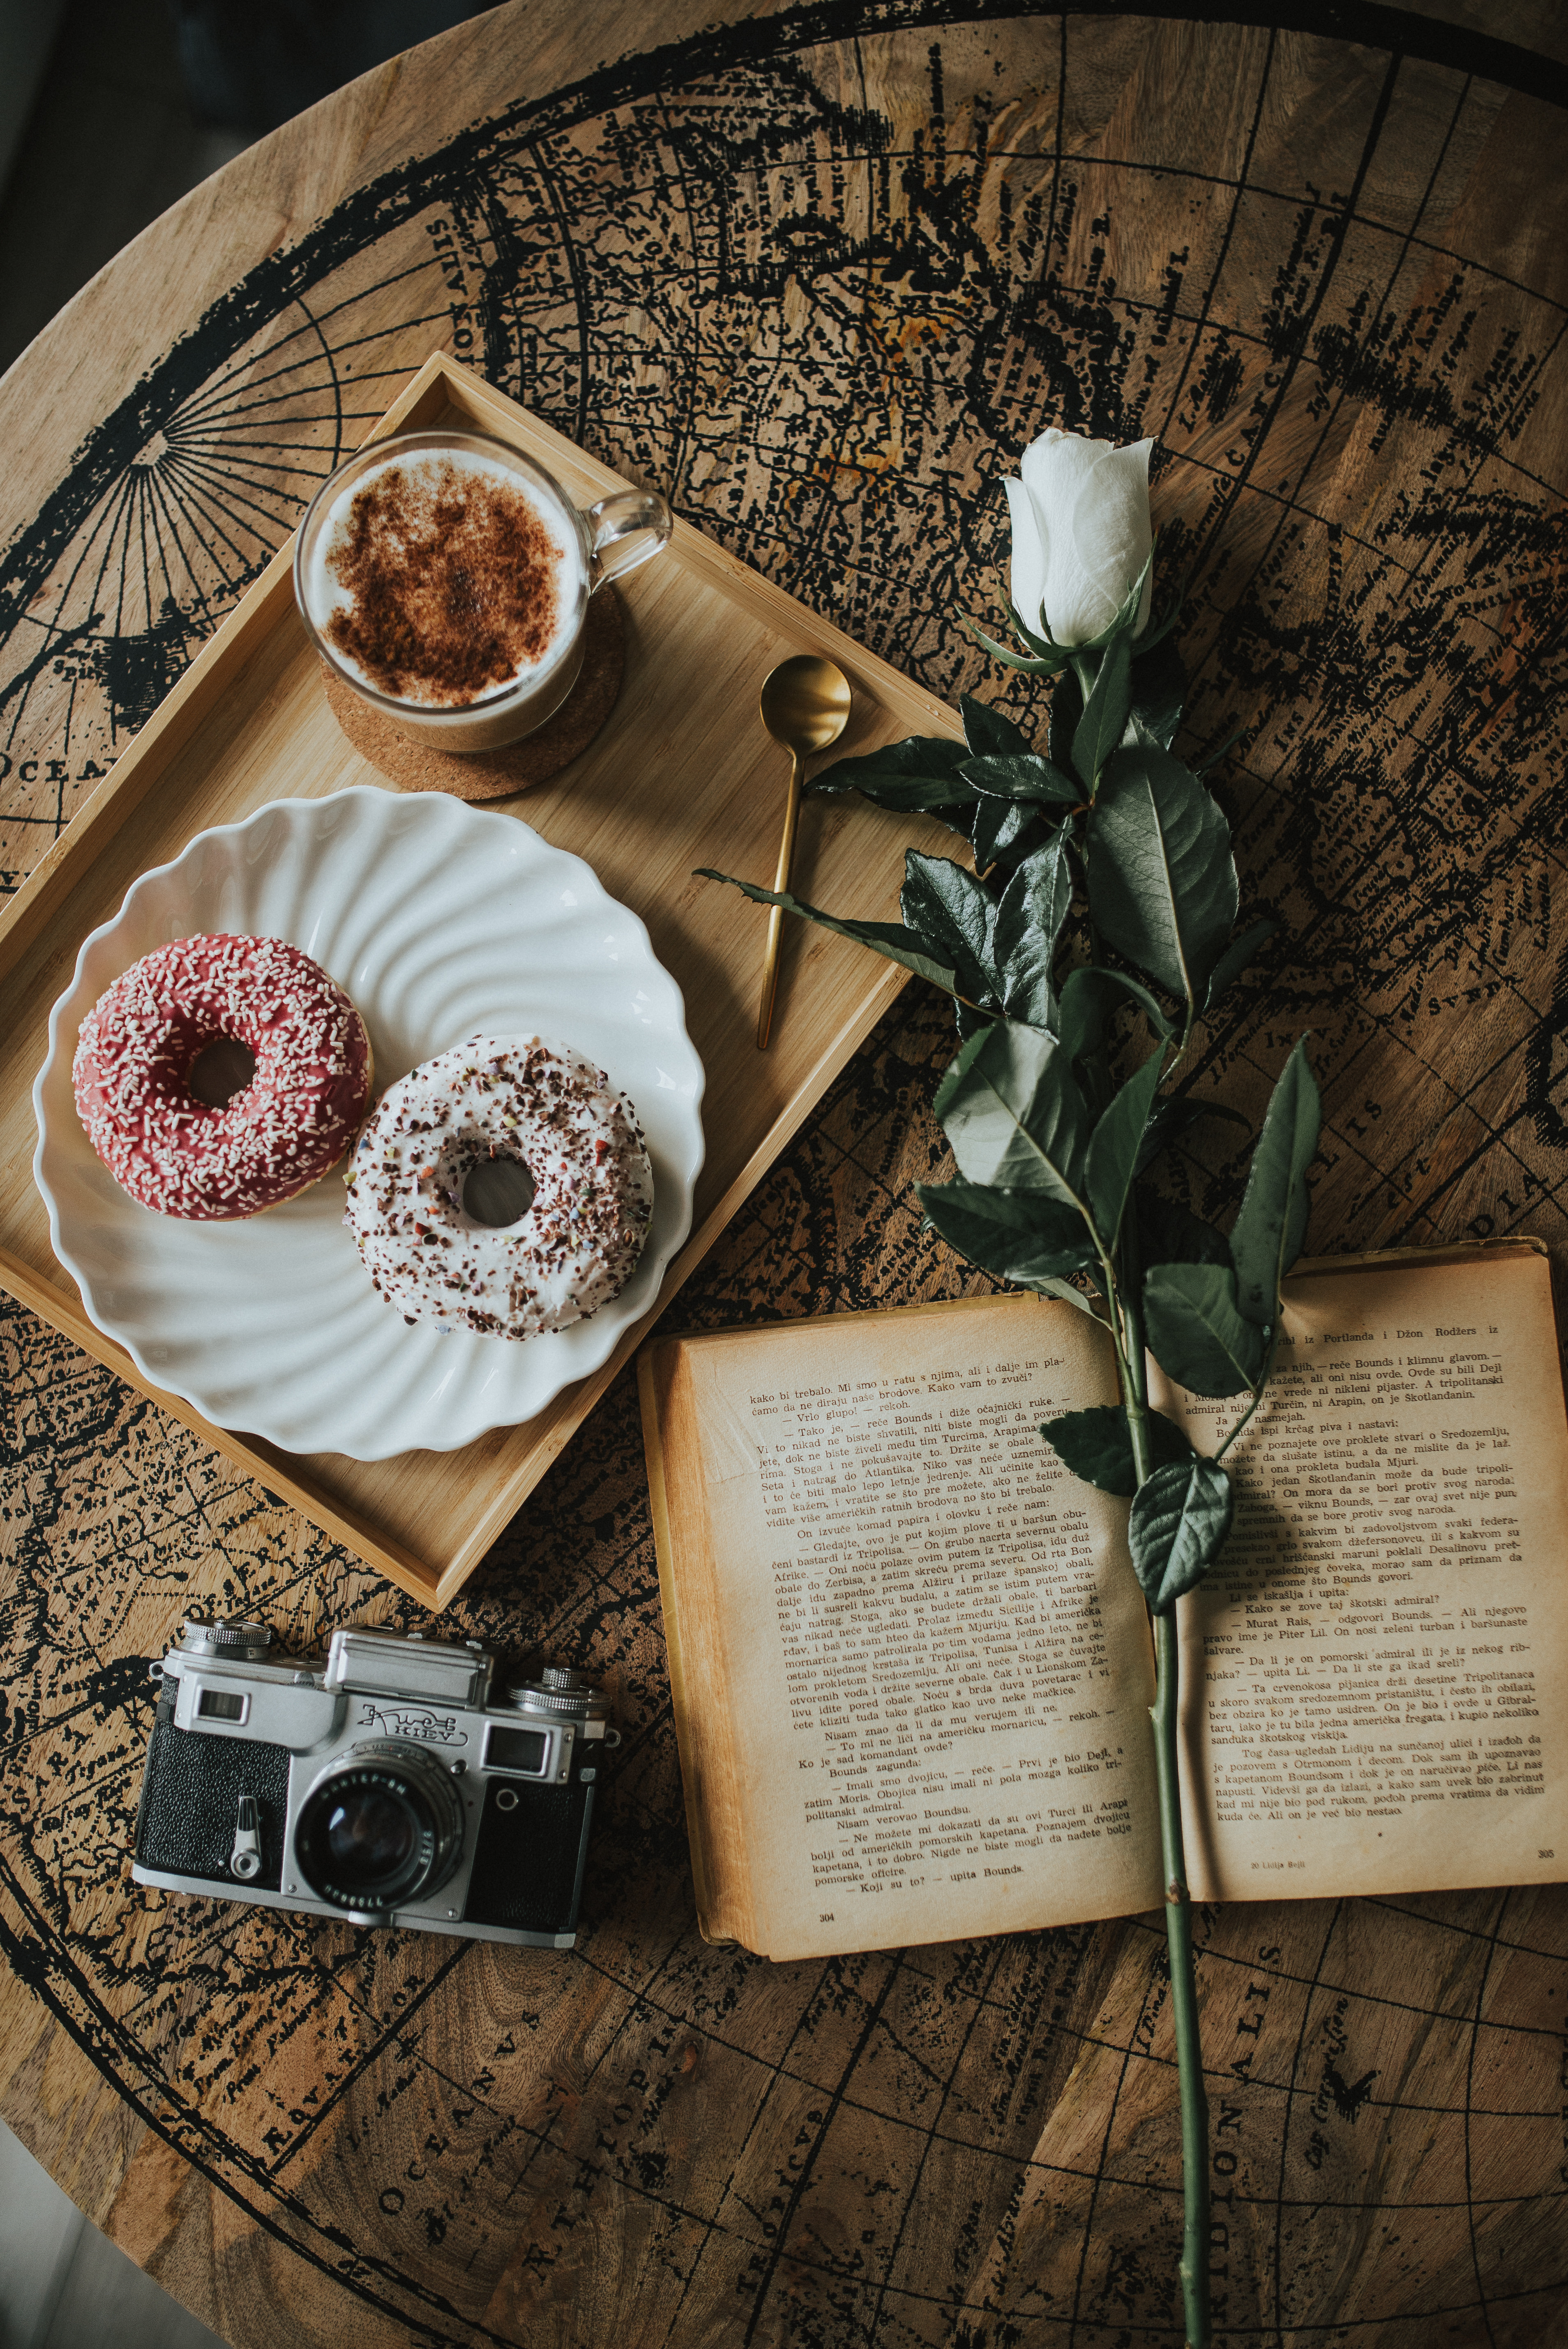 53218 download wallpaper coffee, flower, miscellanea, miscellaneous, cup, book, camera, donuts screensavers and pictures for free